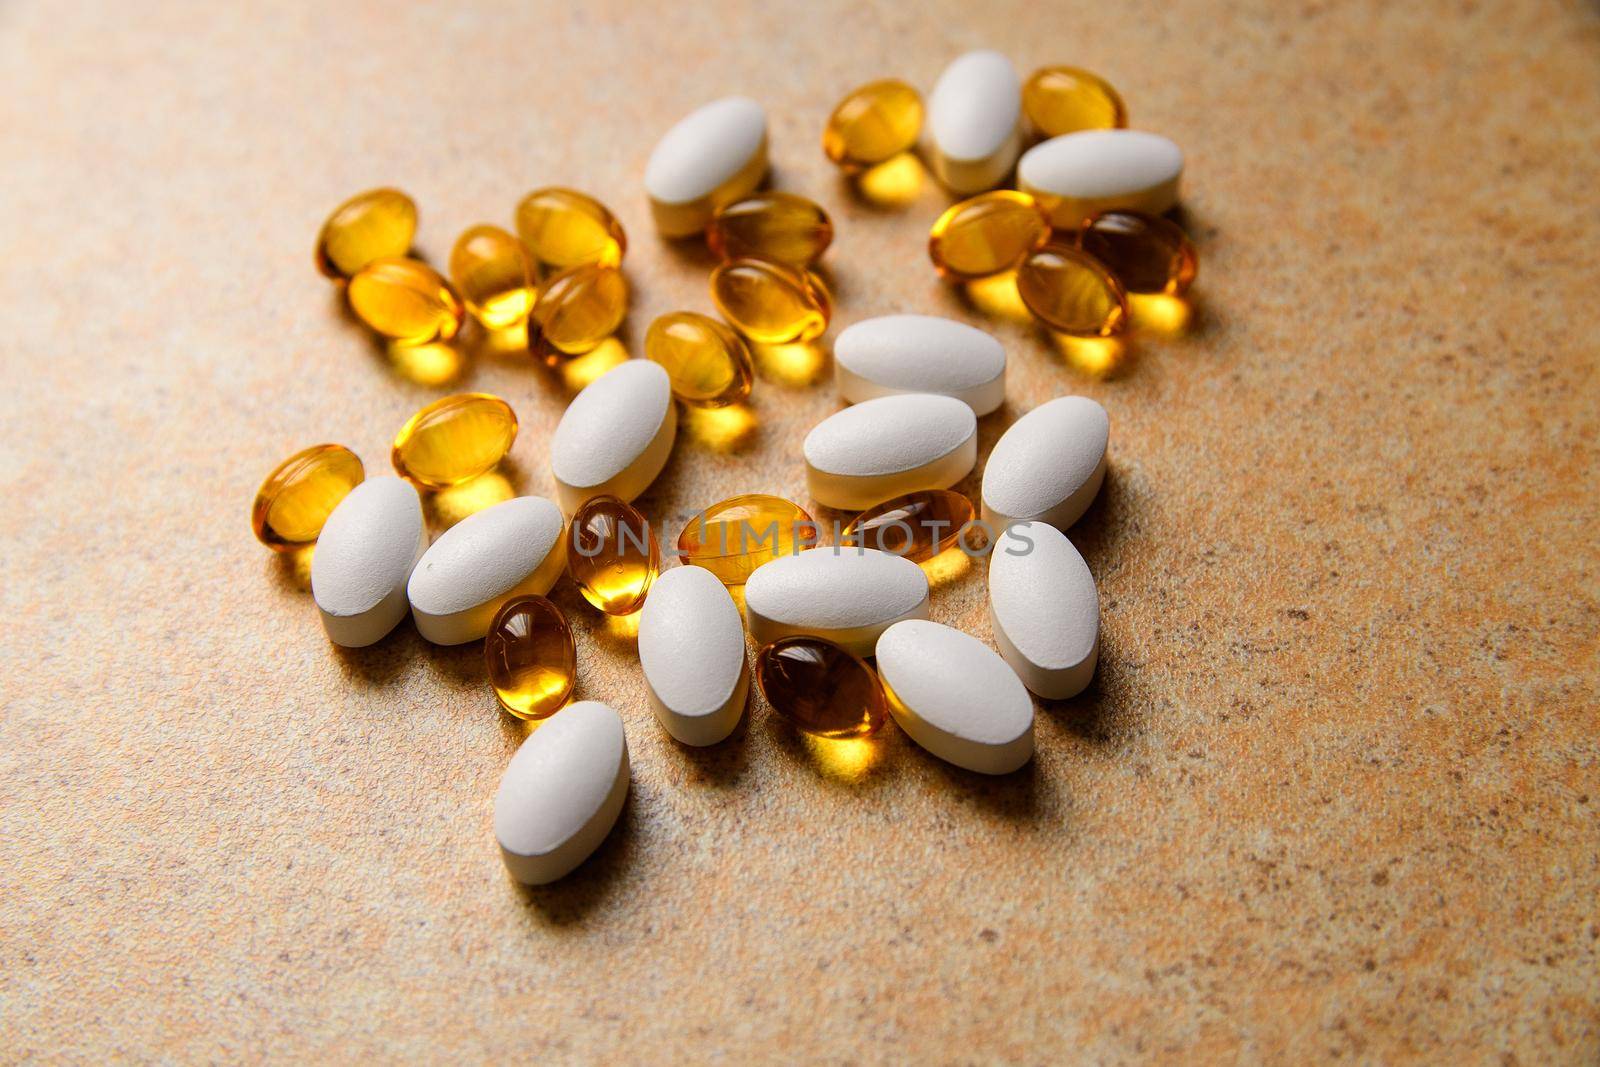 Vitamin D and fish oil capsules randomly lie on the background